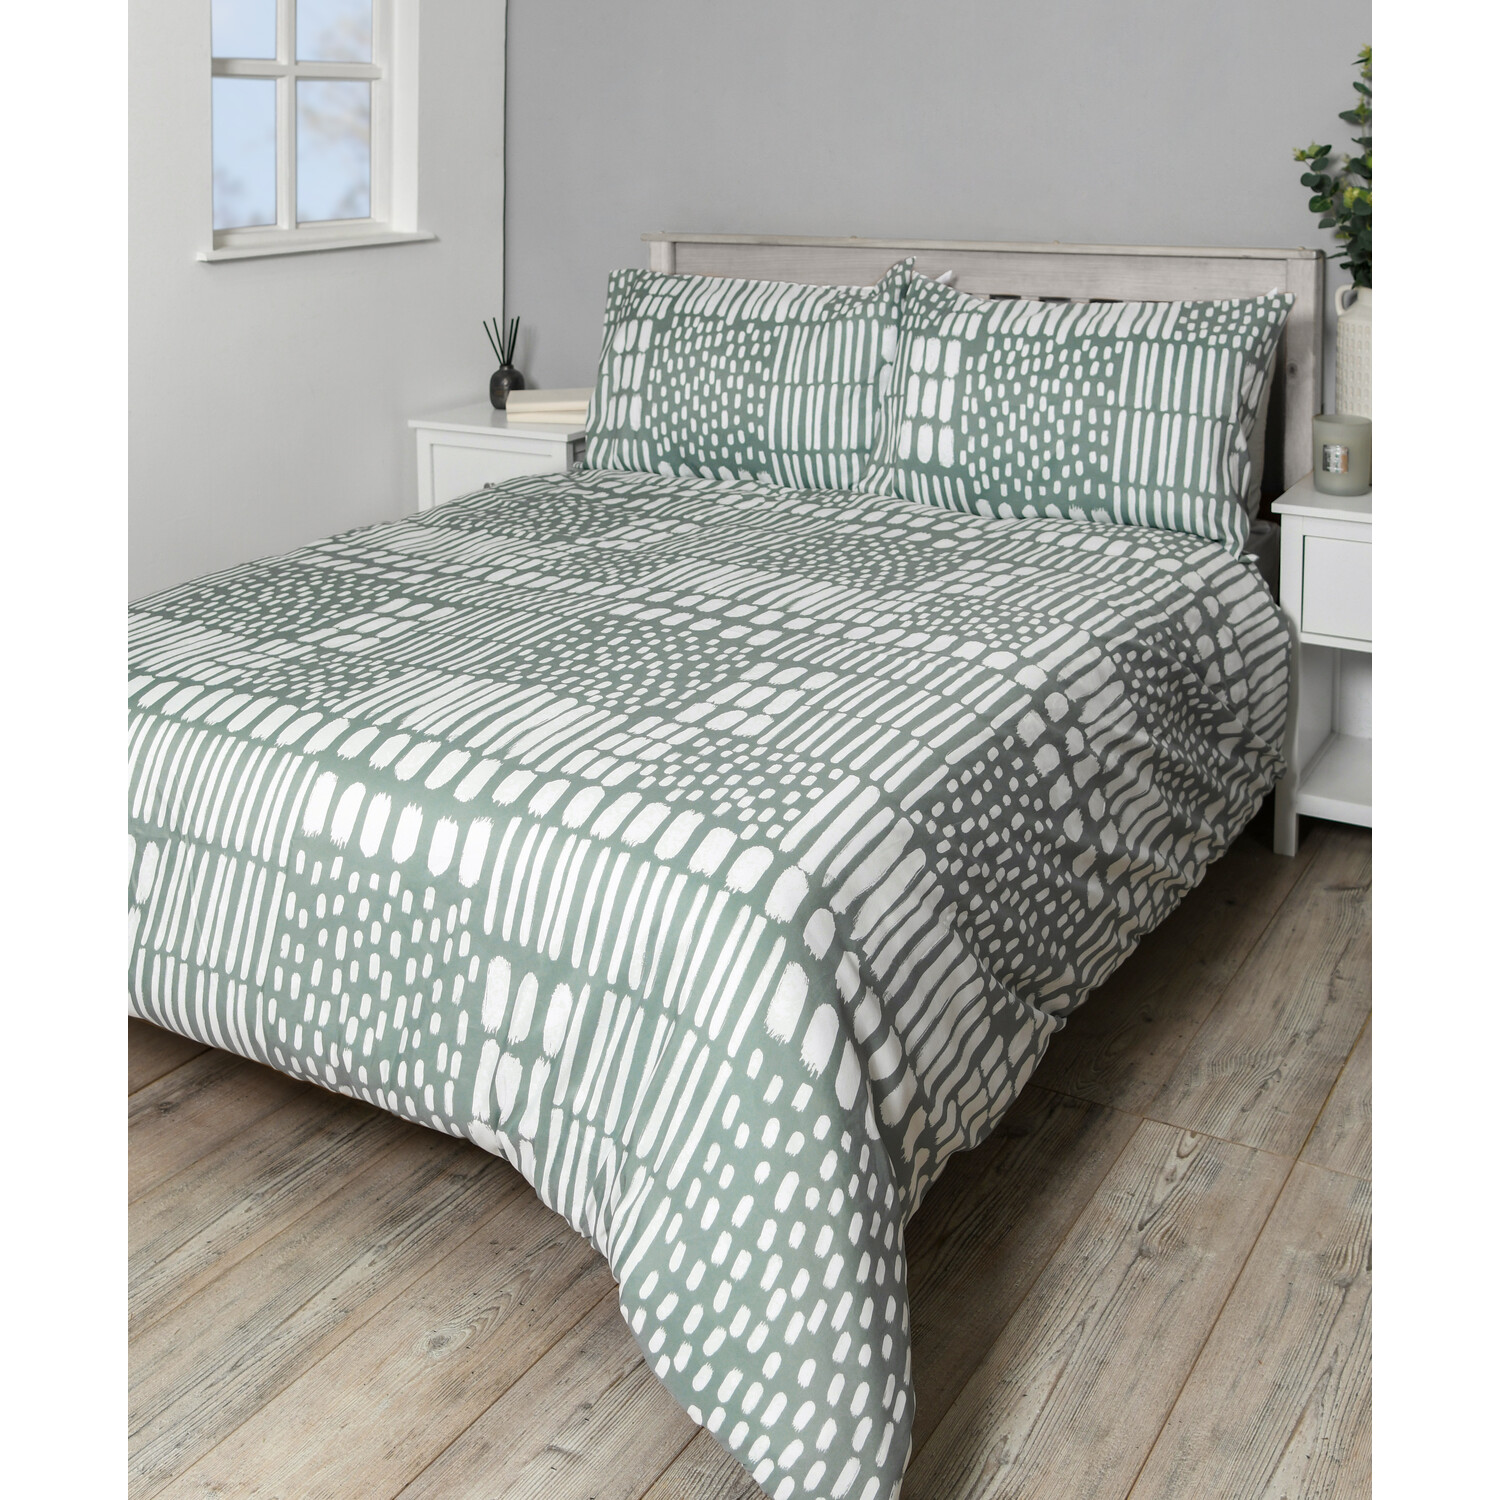 My Home Double Sage Kailani Duvet Cover and Pillowcase Set Image 2